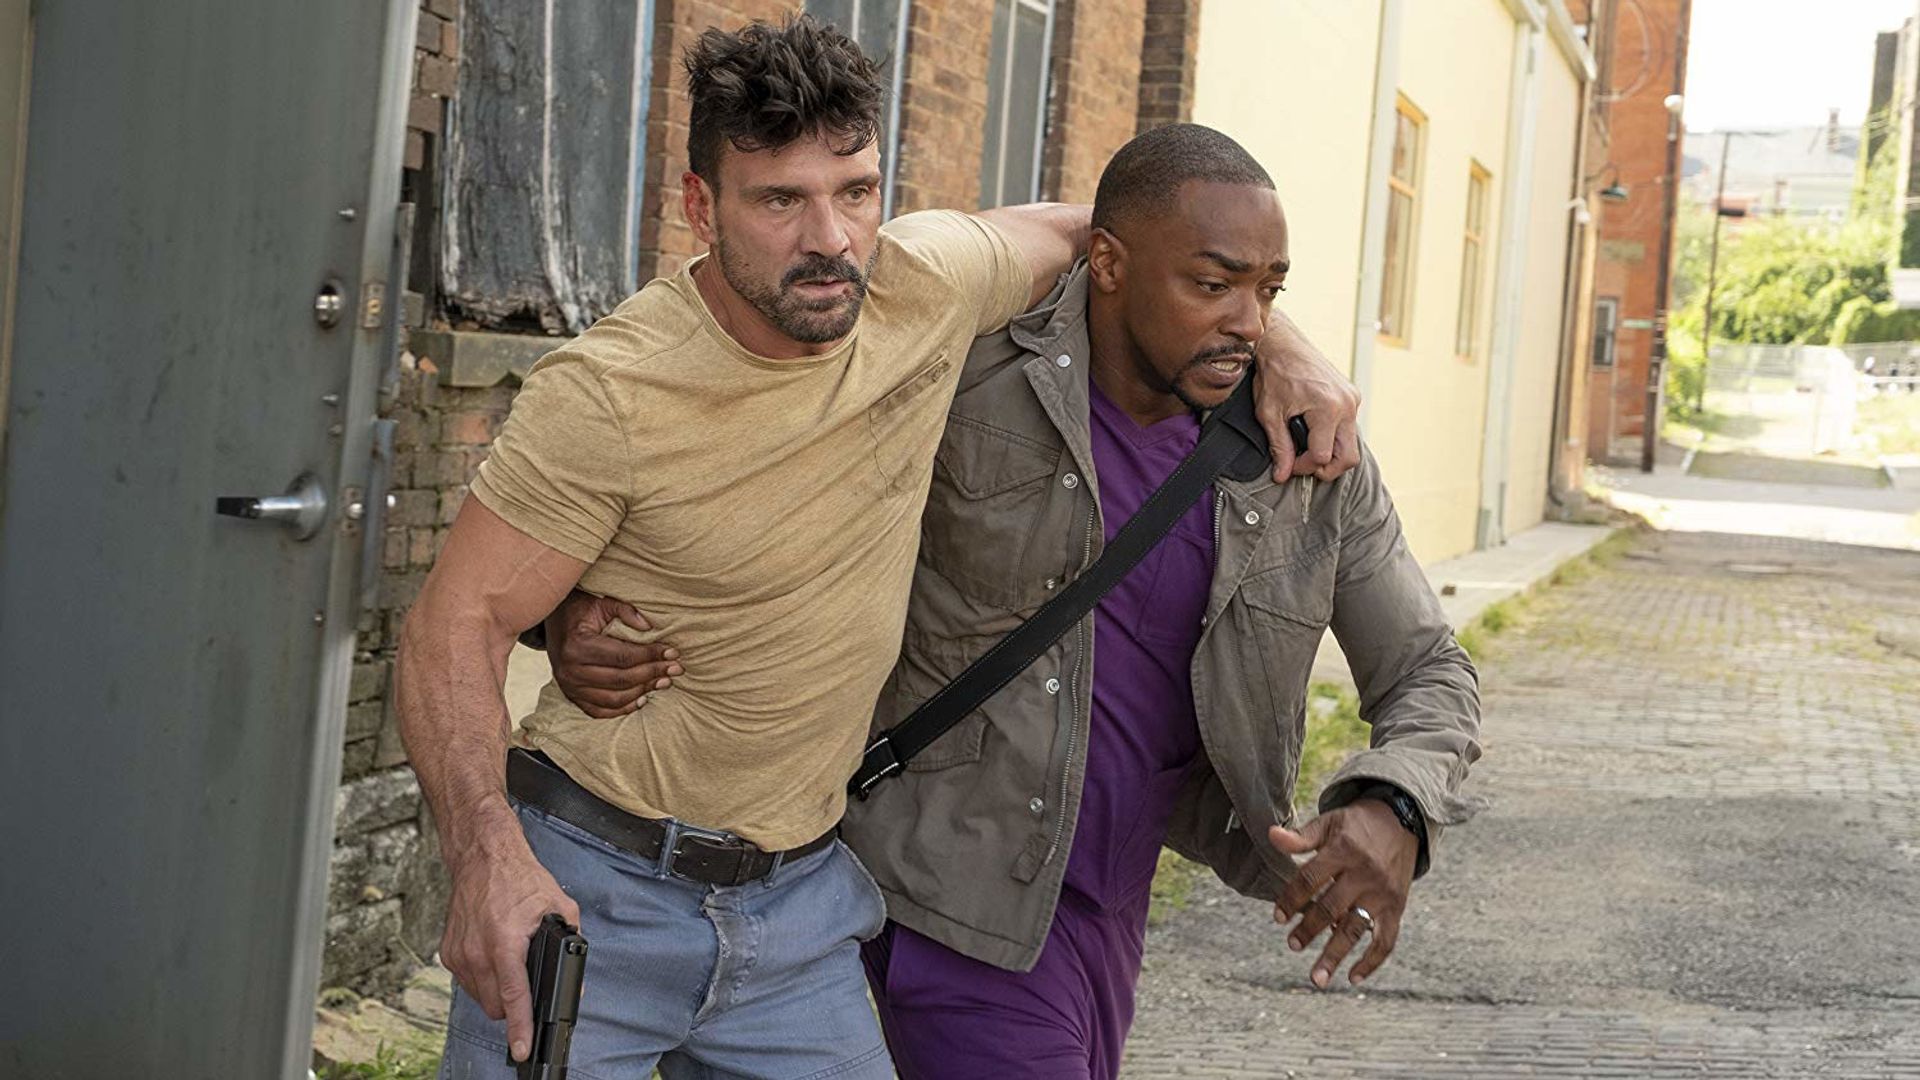 Frank Grillo in the movie “Point Blank”